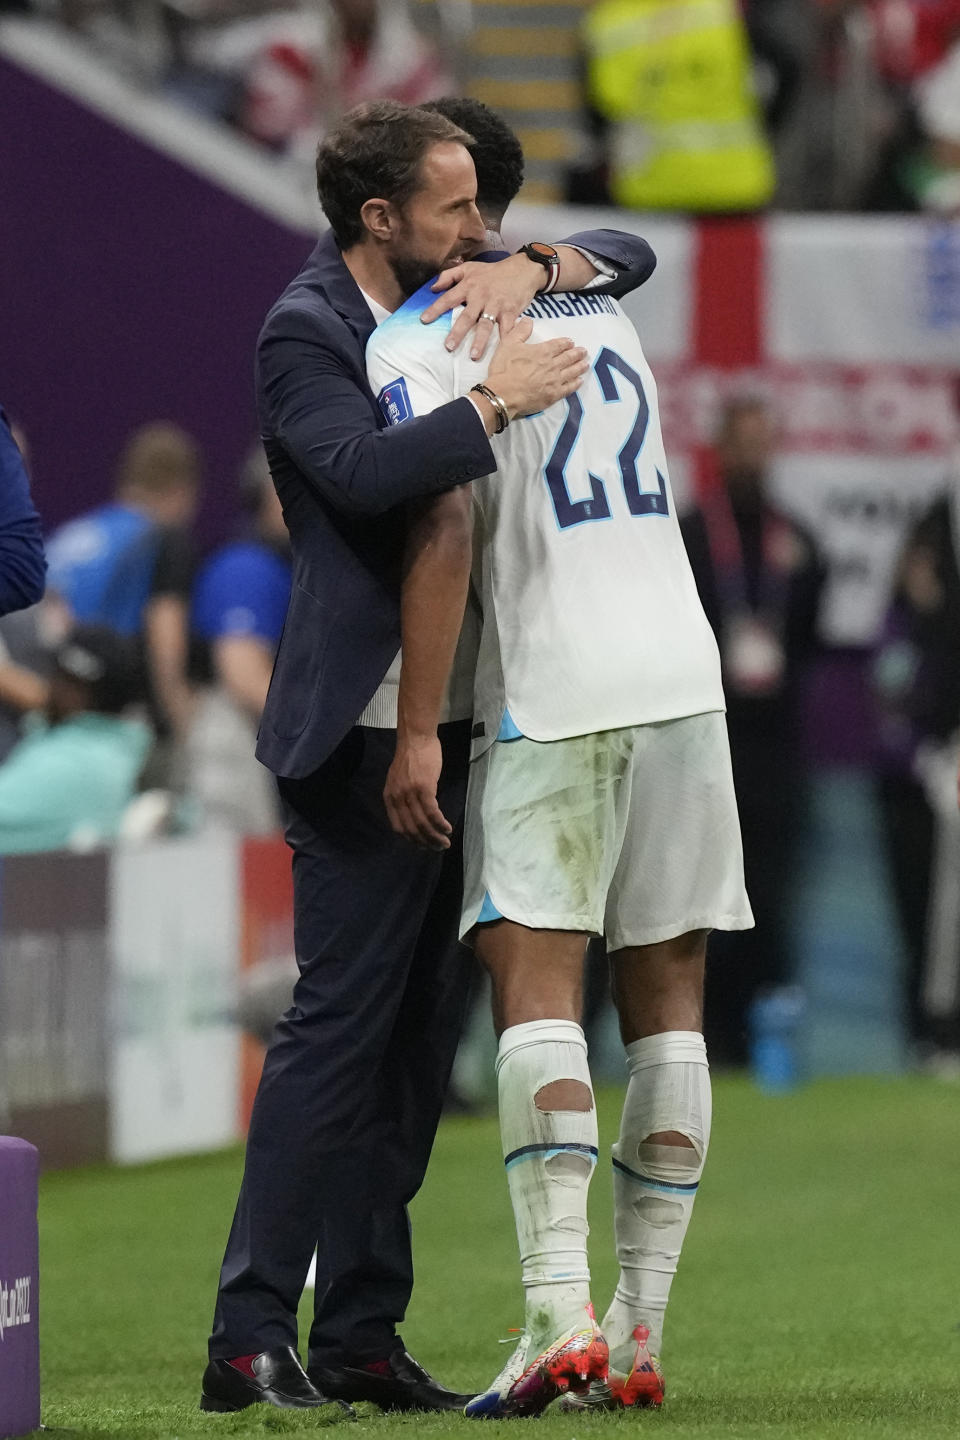 England's head coach Gareth Southgate embraces Jude Bellingham after replacing him for Mason Mount during the World Cup round of 16 soccer match between England and Senegal, at the Al Bayt Stadium in Al Khor, Qatar, Sunday, Dec. 4, 2022. (AP Photo/Frank Augstein)